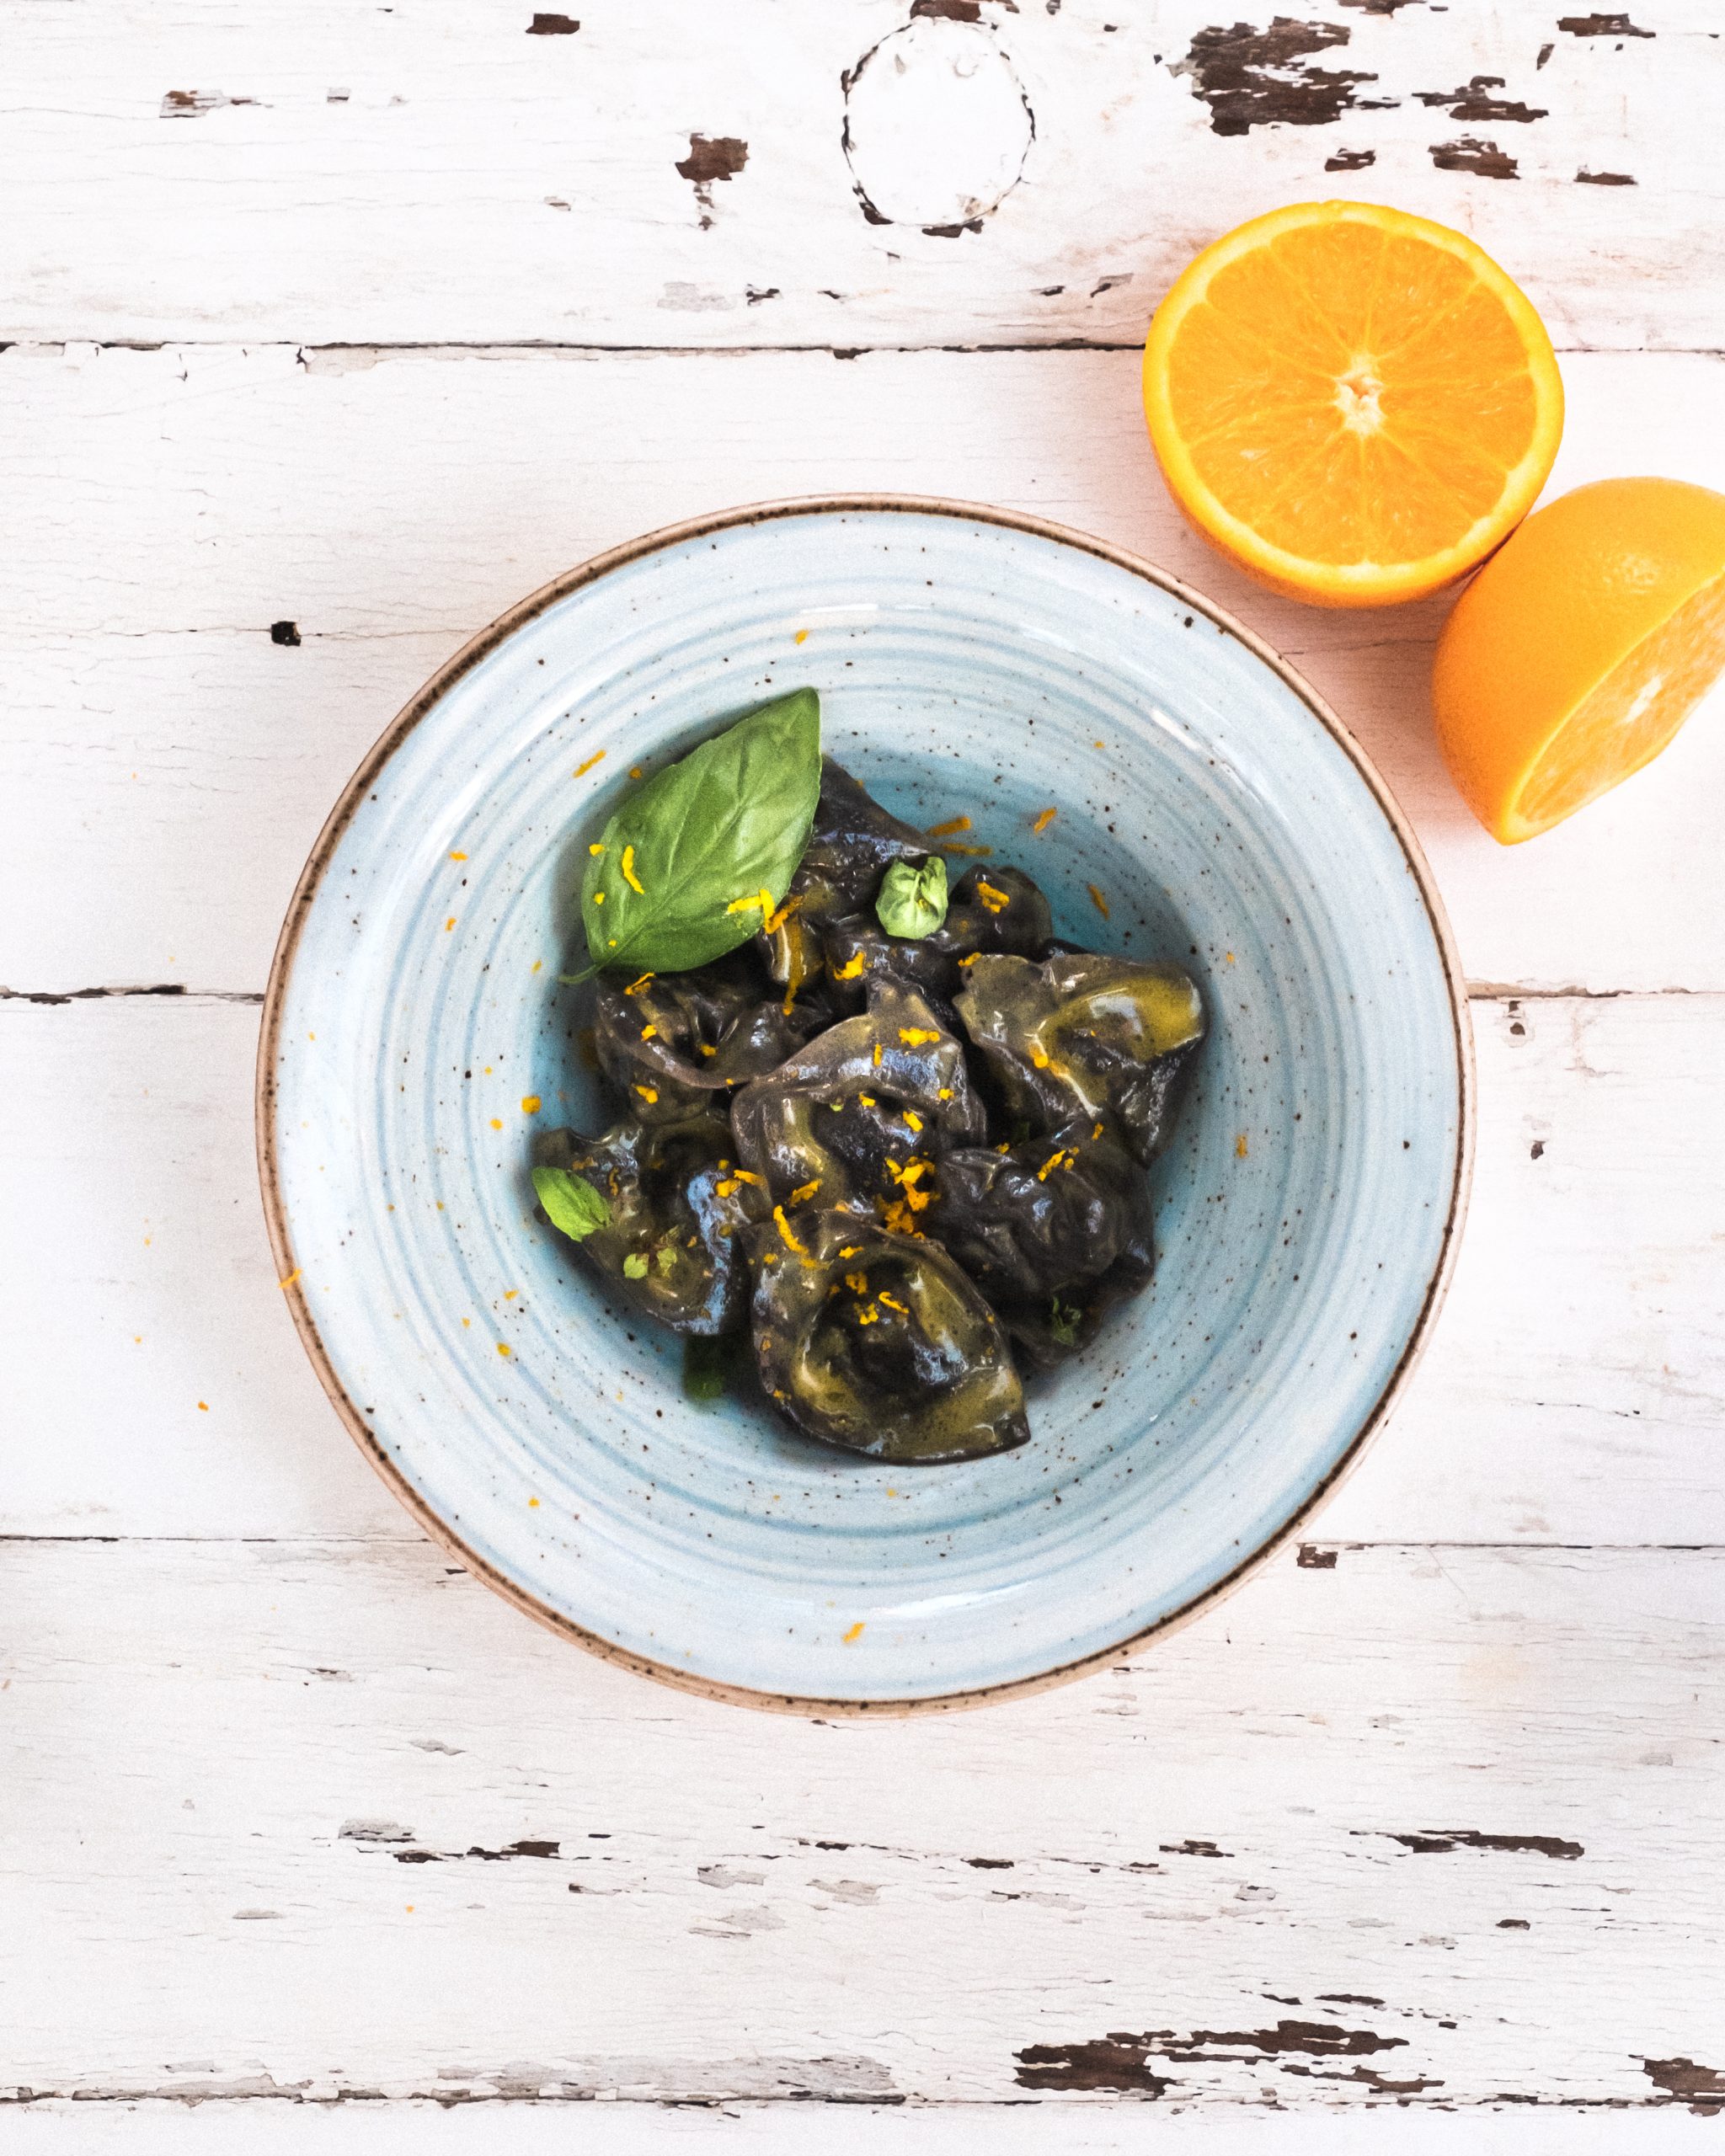 Squid Ink Raviolo Stuffed With Bream Basil And Orange Shavings